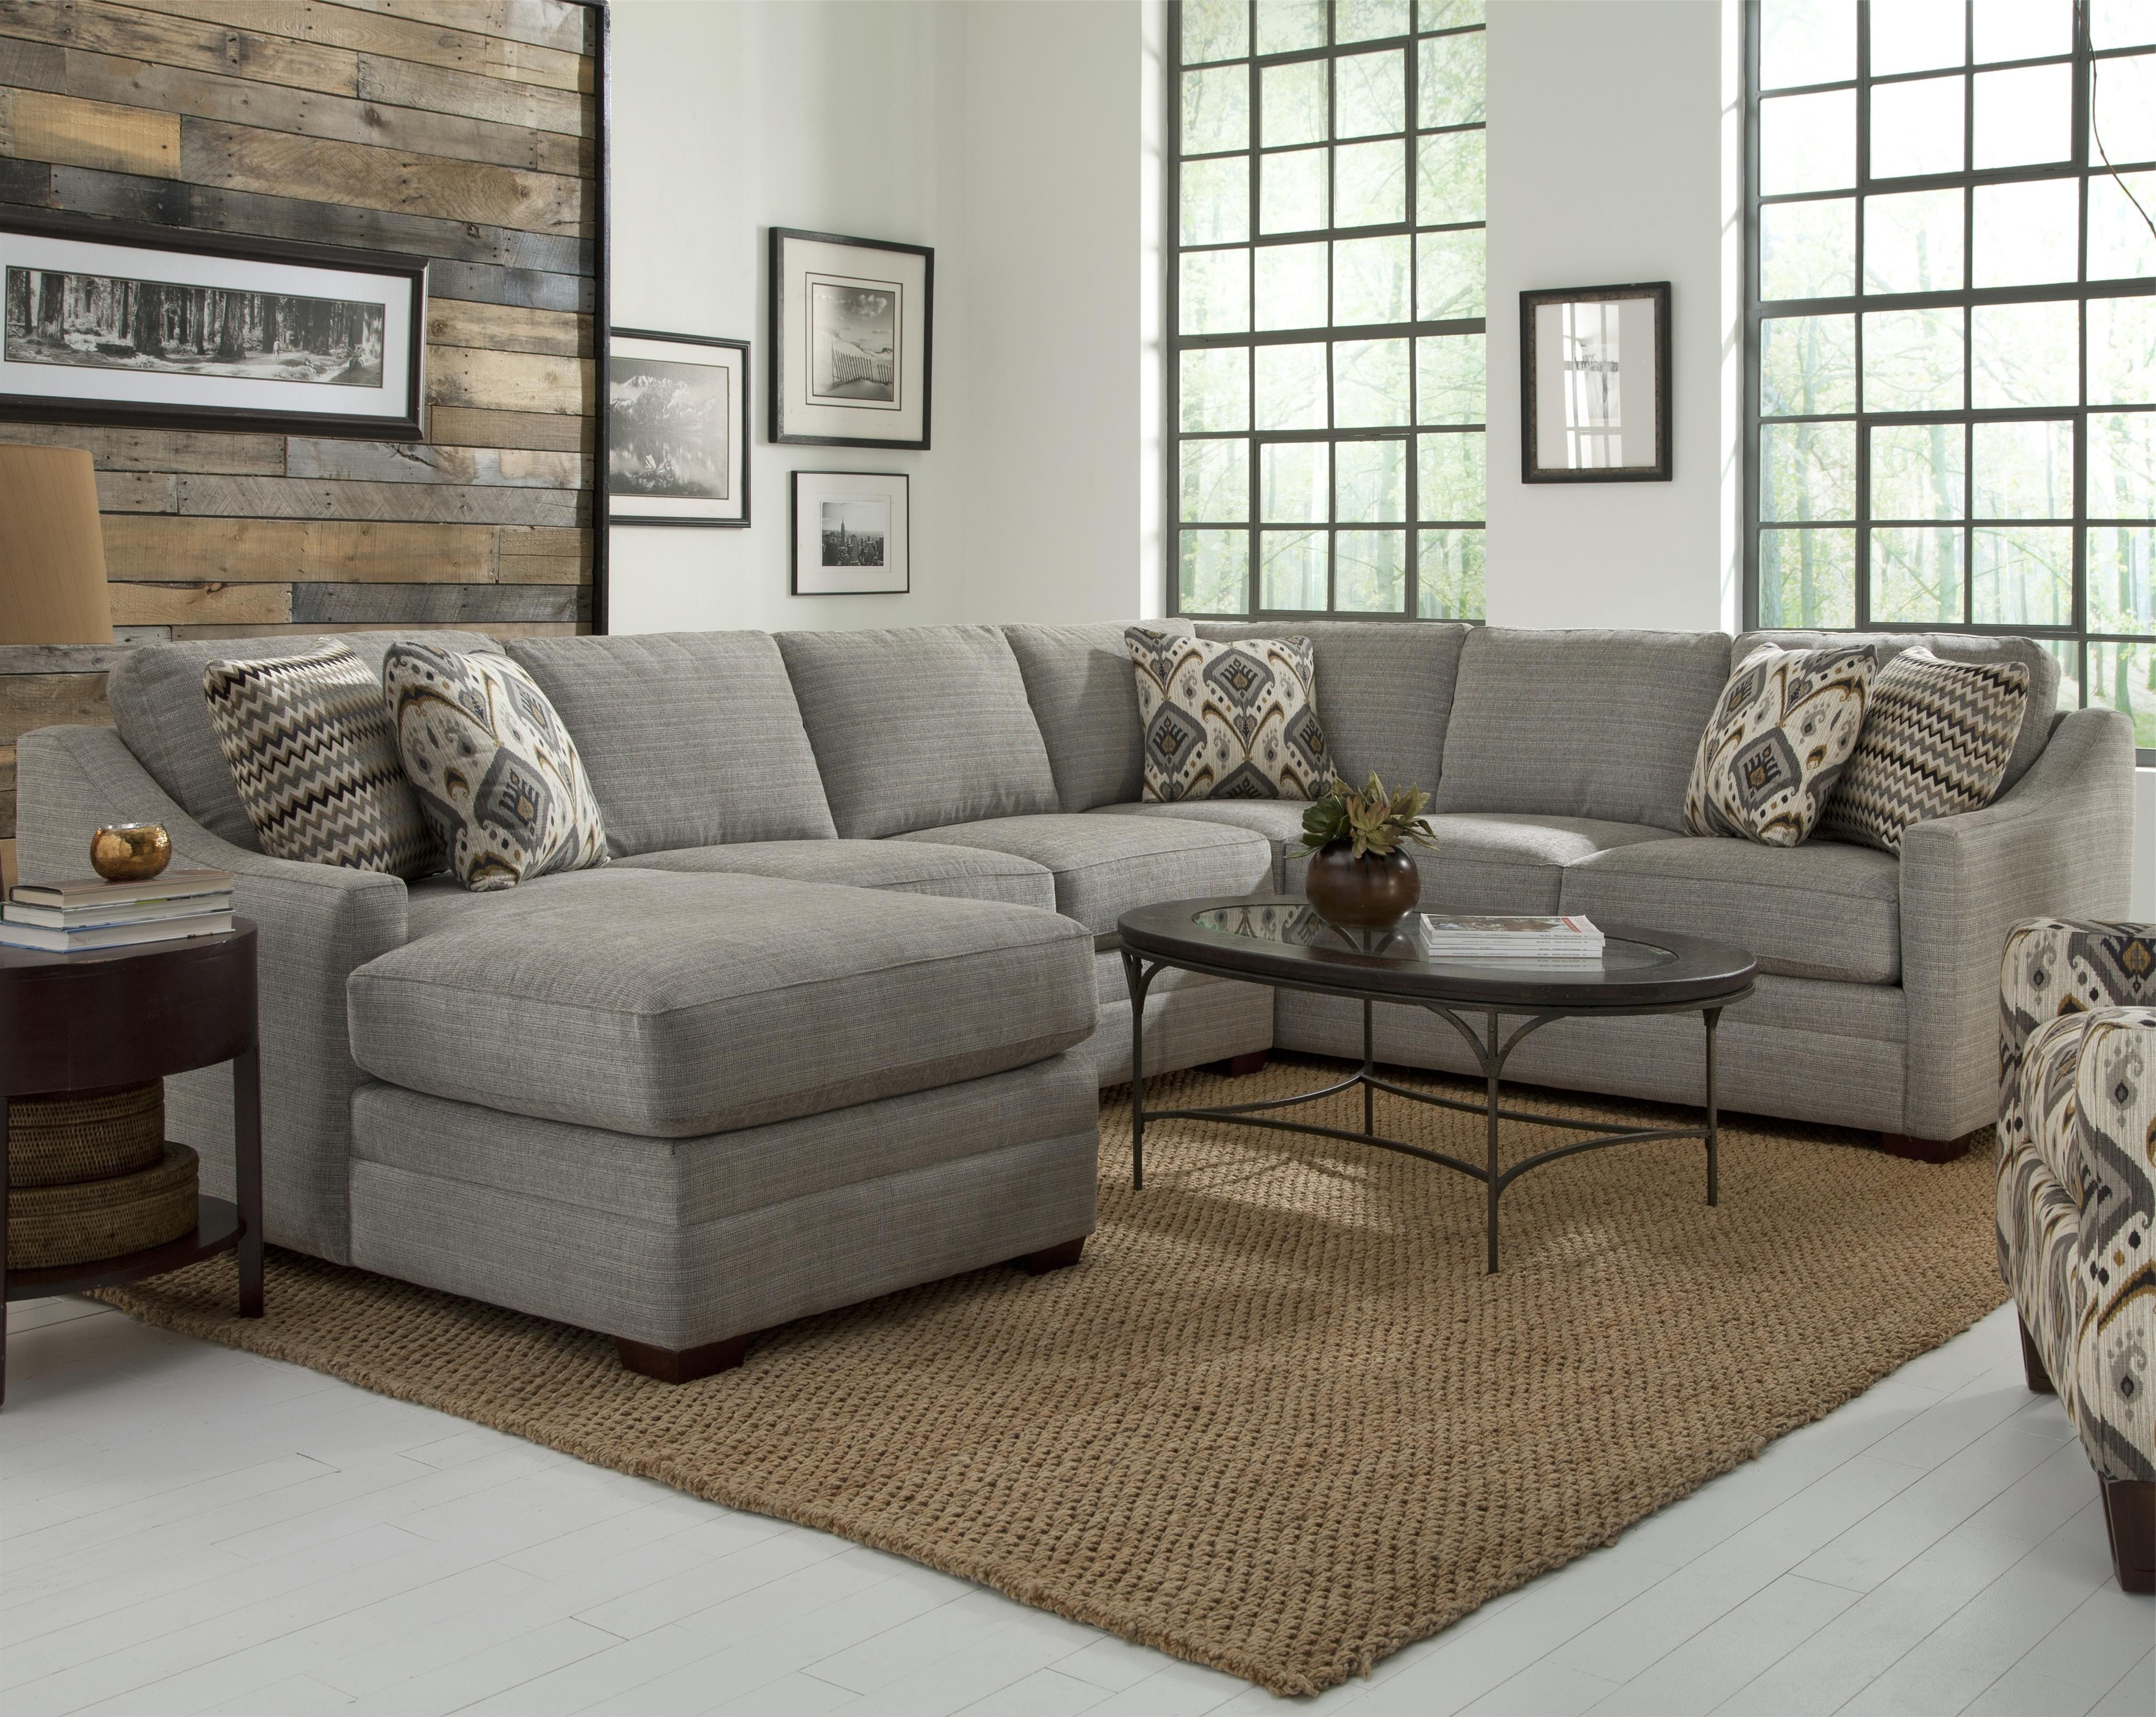 Featured Photo of 15 Best Ideas Craftsman Sectional Sofas